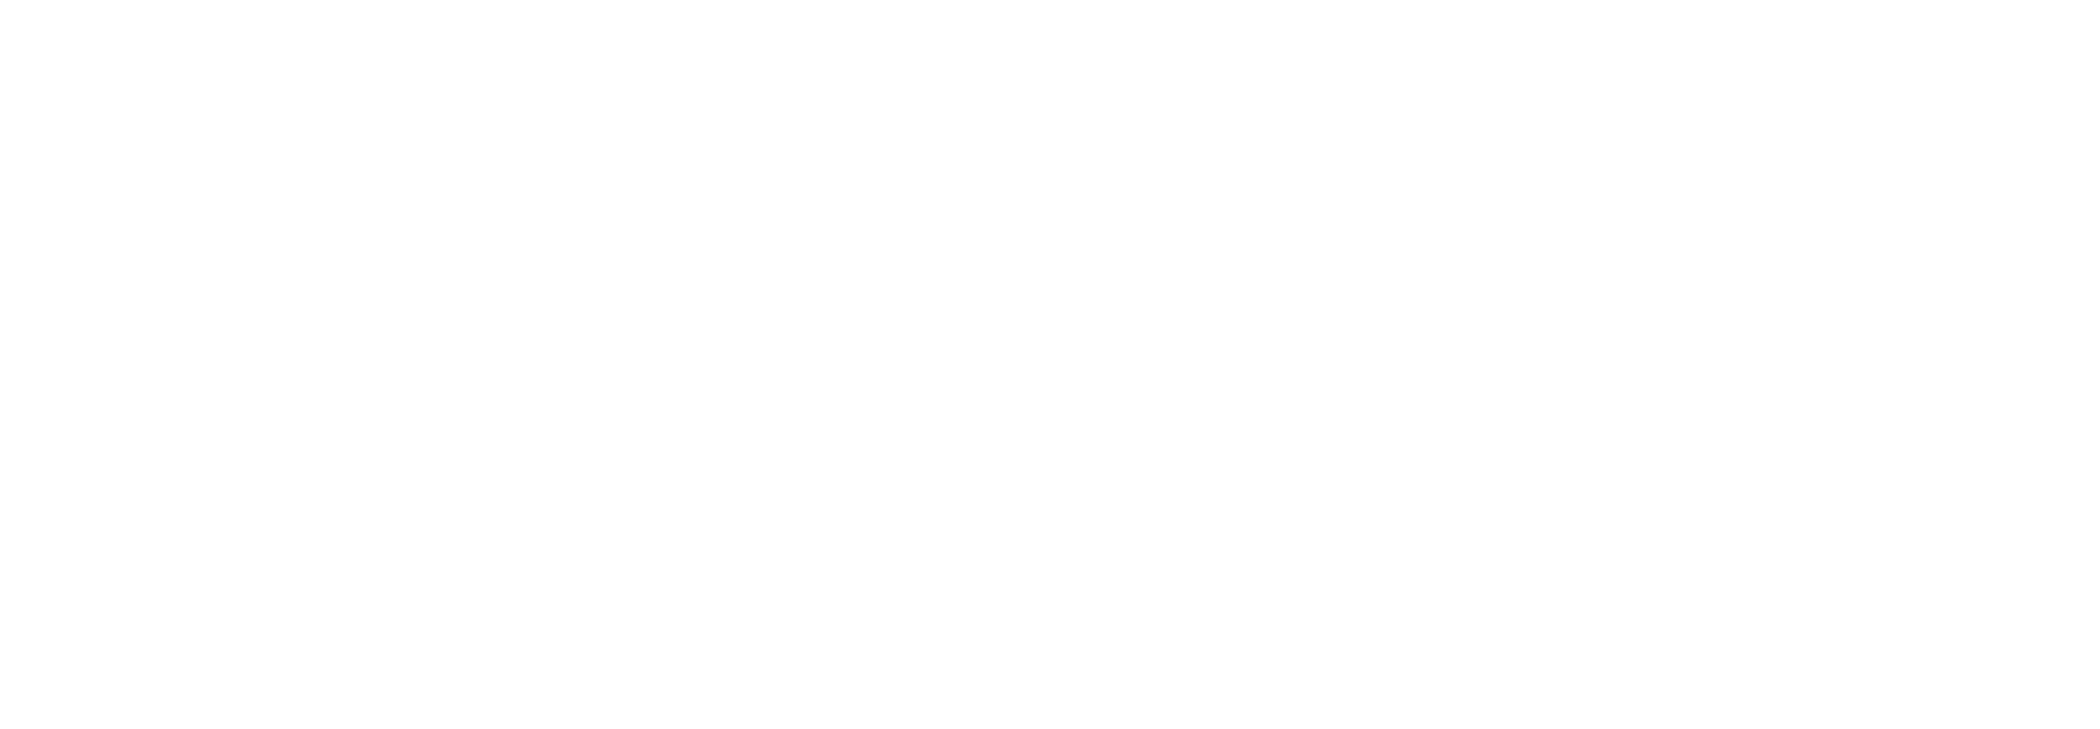 UC Center for Business Law, San Francisco